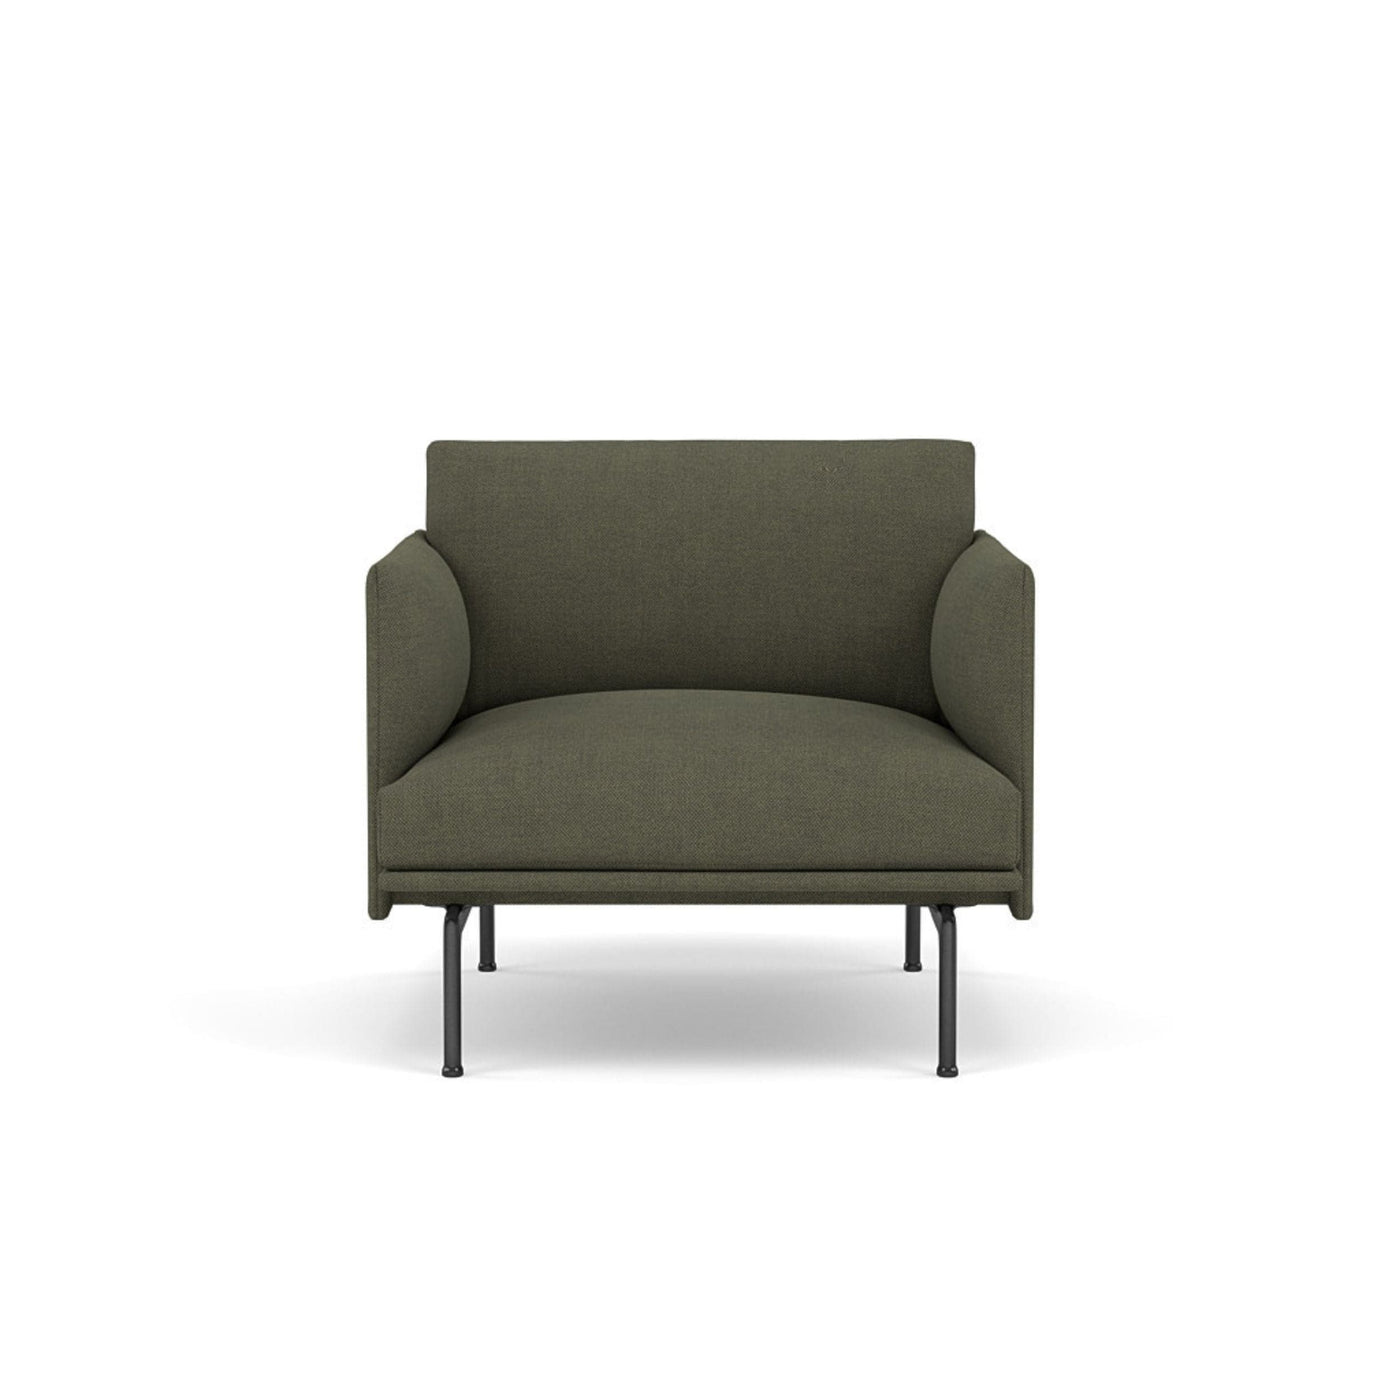 muuto outline studio chair in fiord 961 and black legs. Available at someday designs. #colour_fiord-961